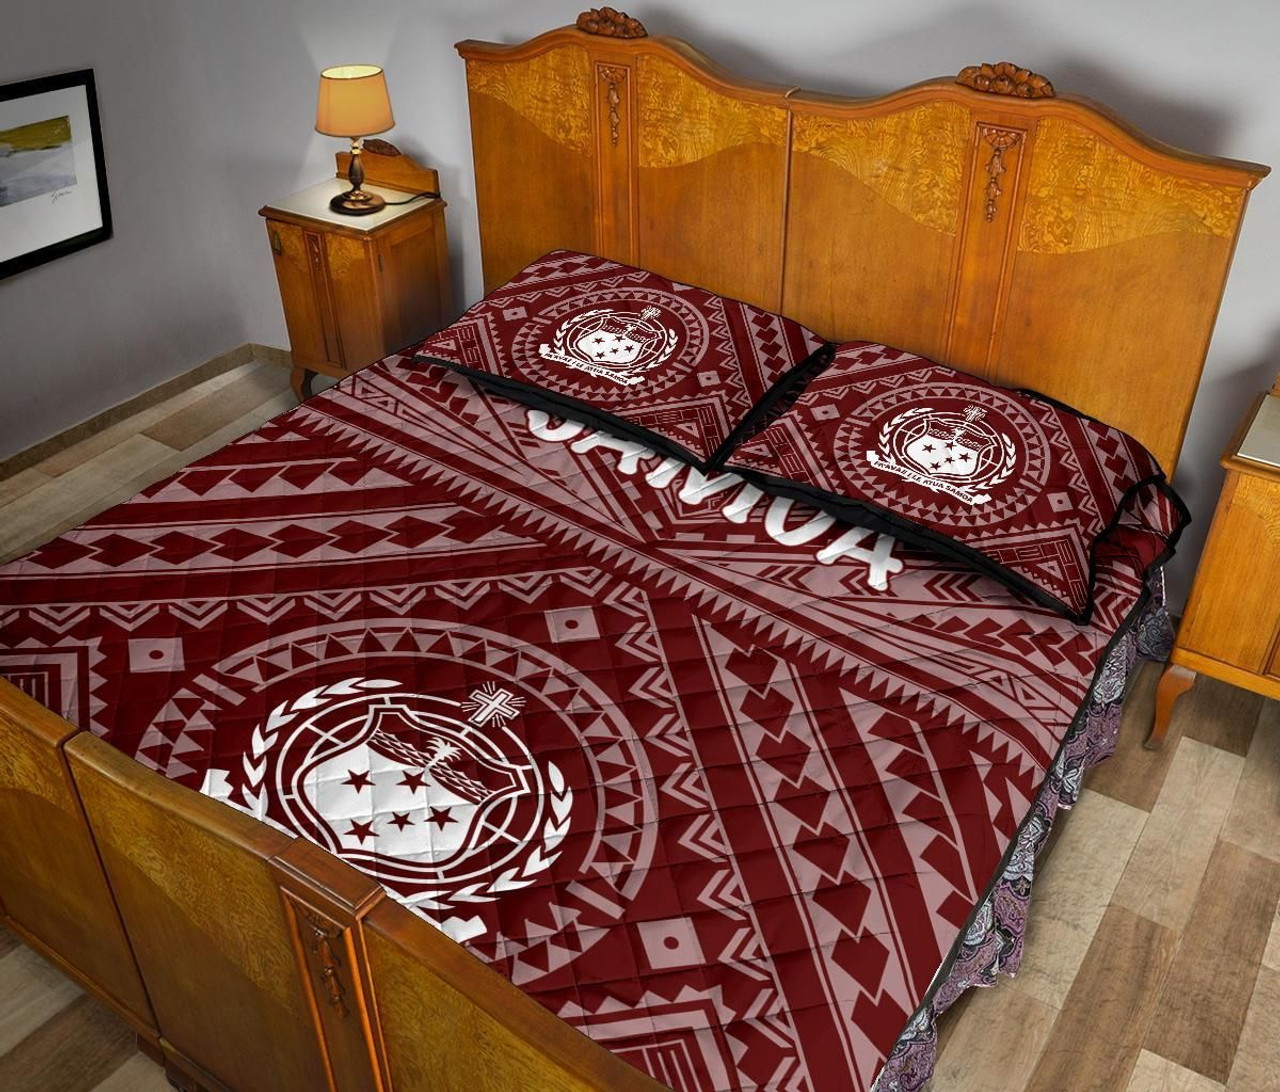 Samoa Quilt Bed Set - Samoa Seal In Polynesian Tattoo Style (Red) 4